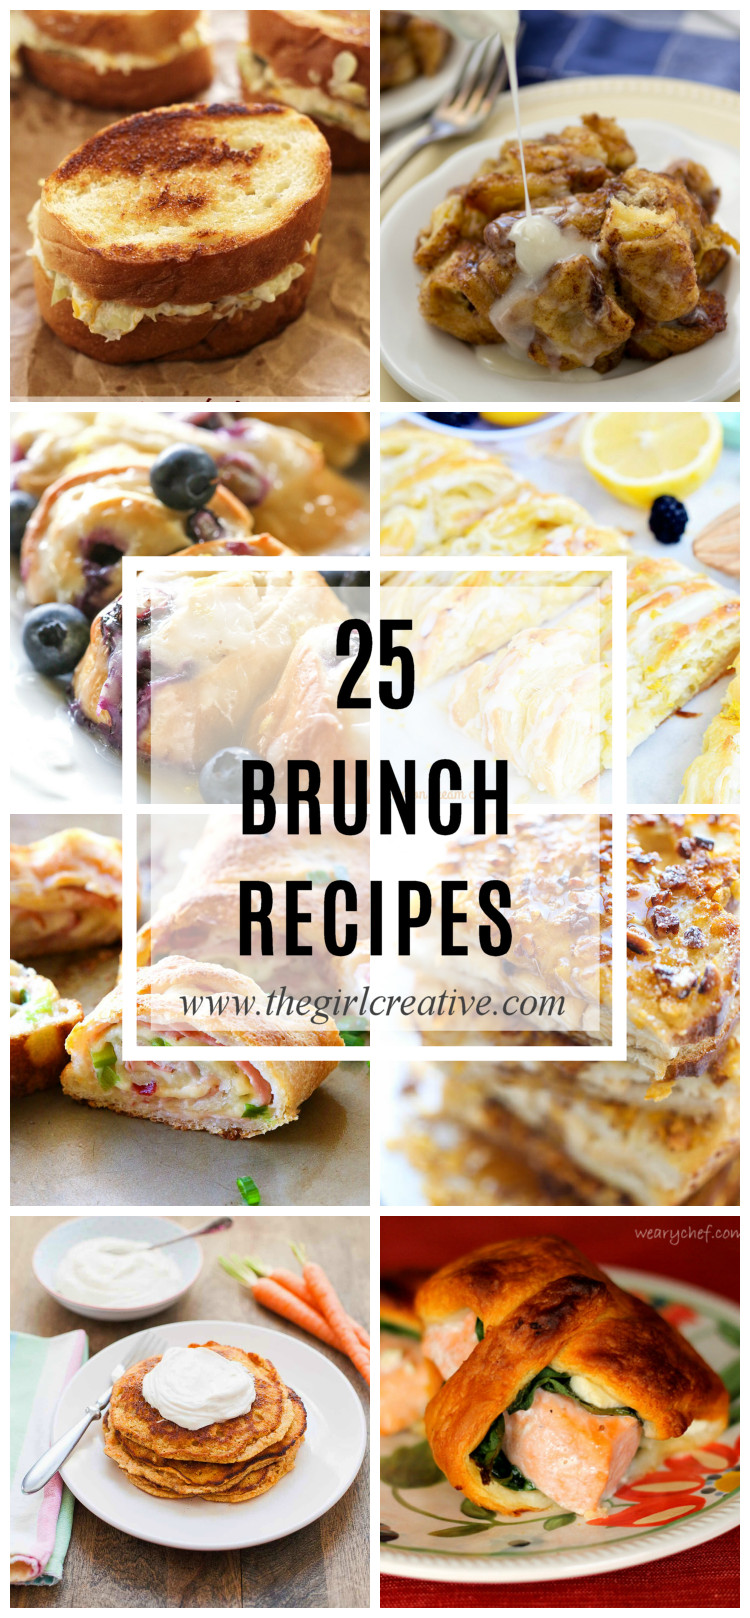 French Brunch Recipes
 25 Delicious Brunch Recipes The Girl Creative